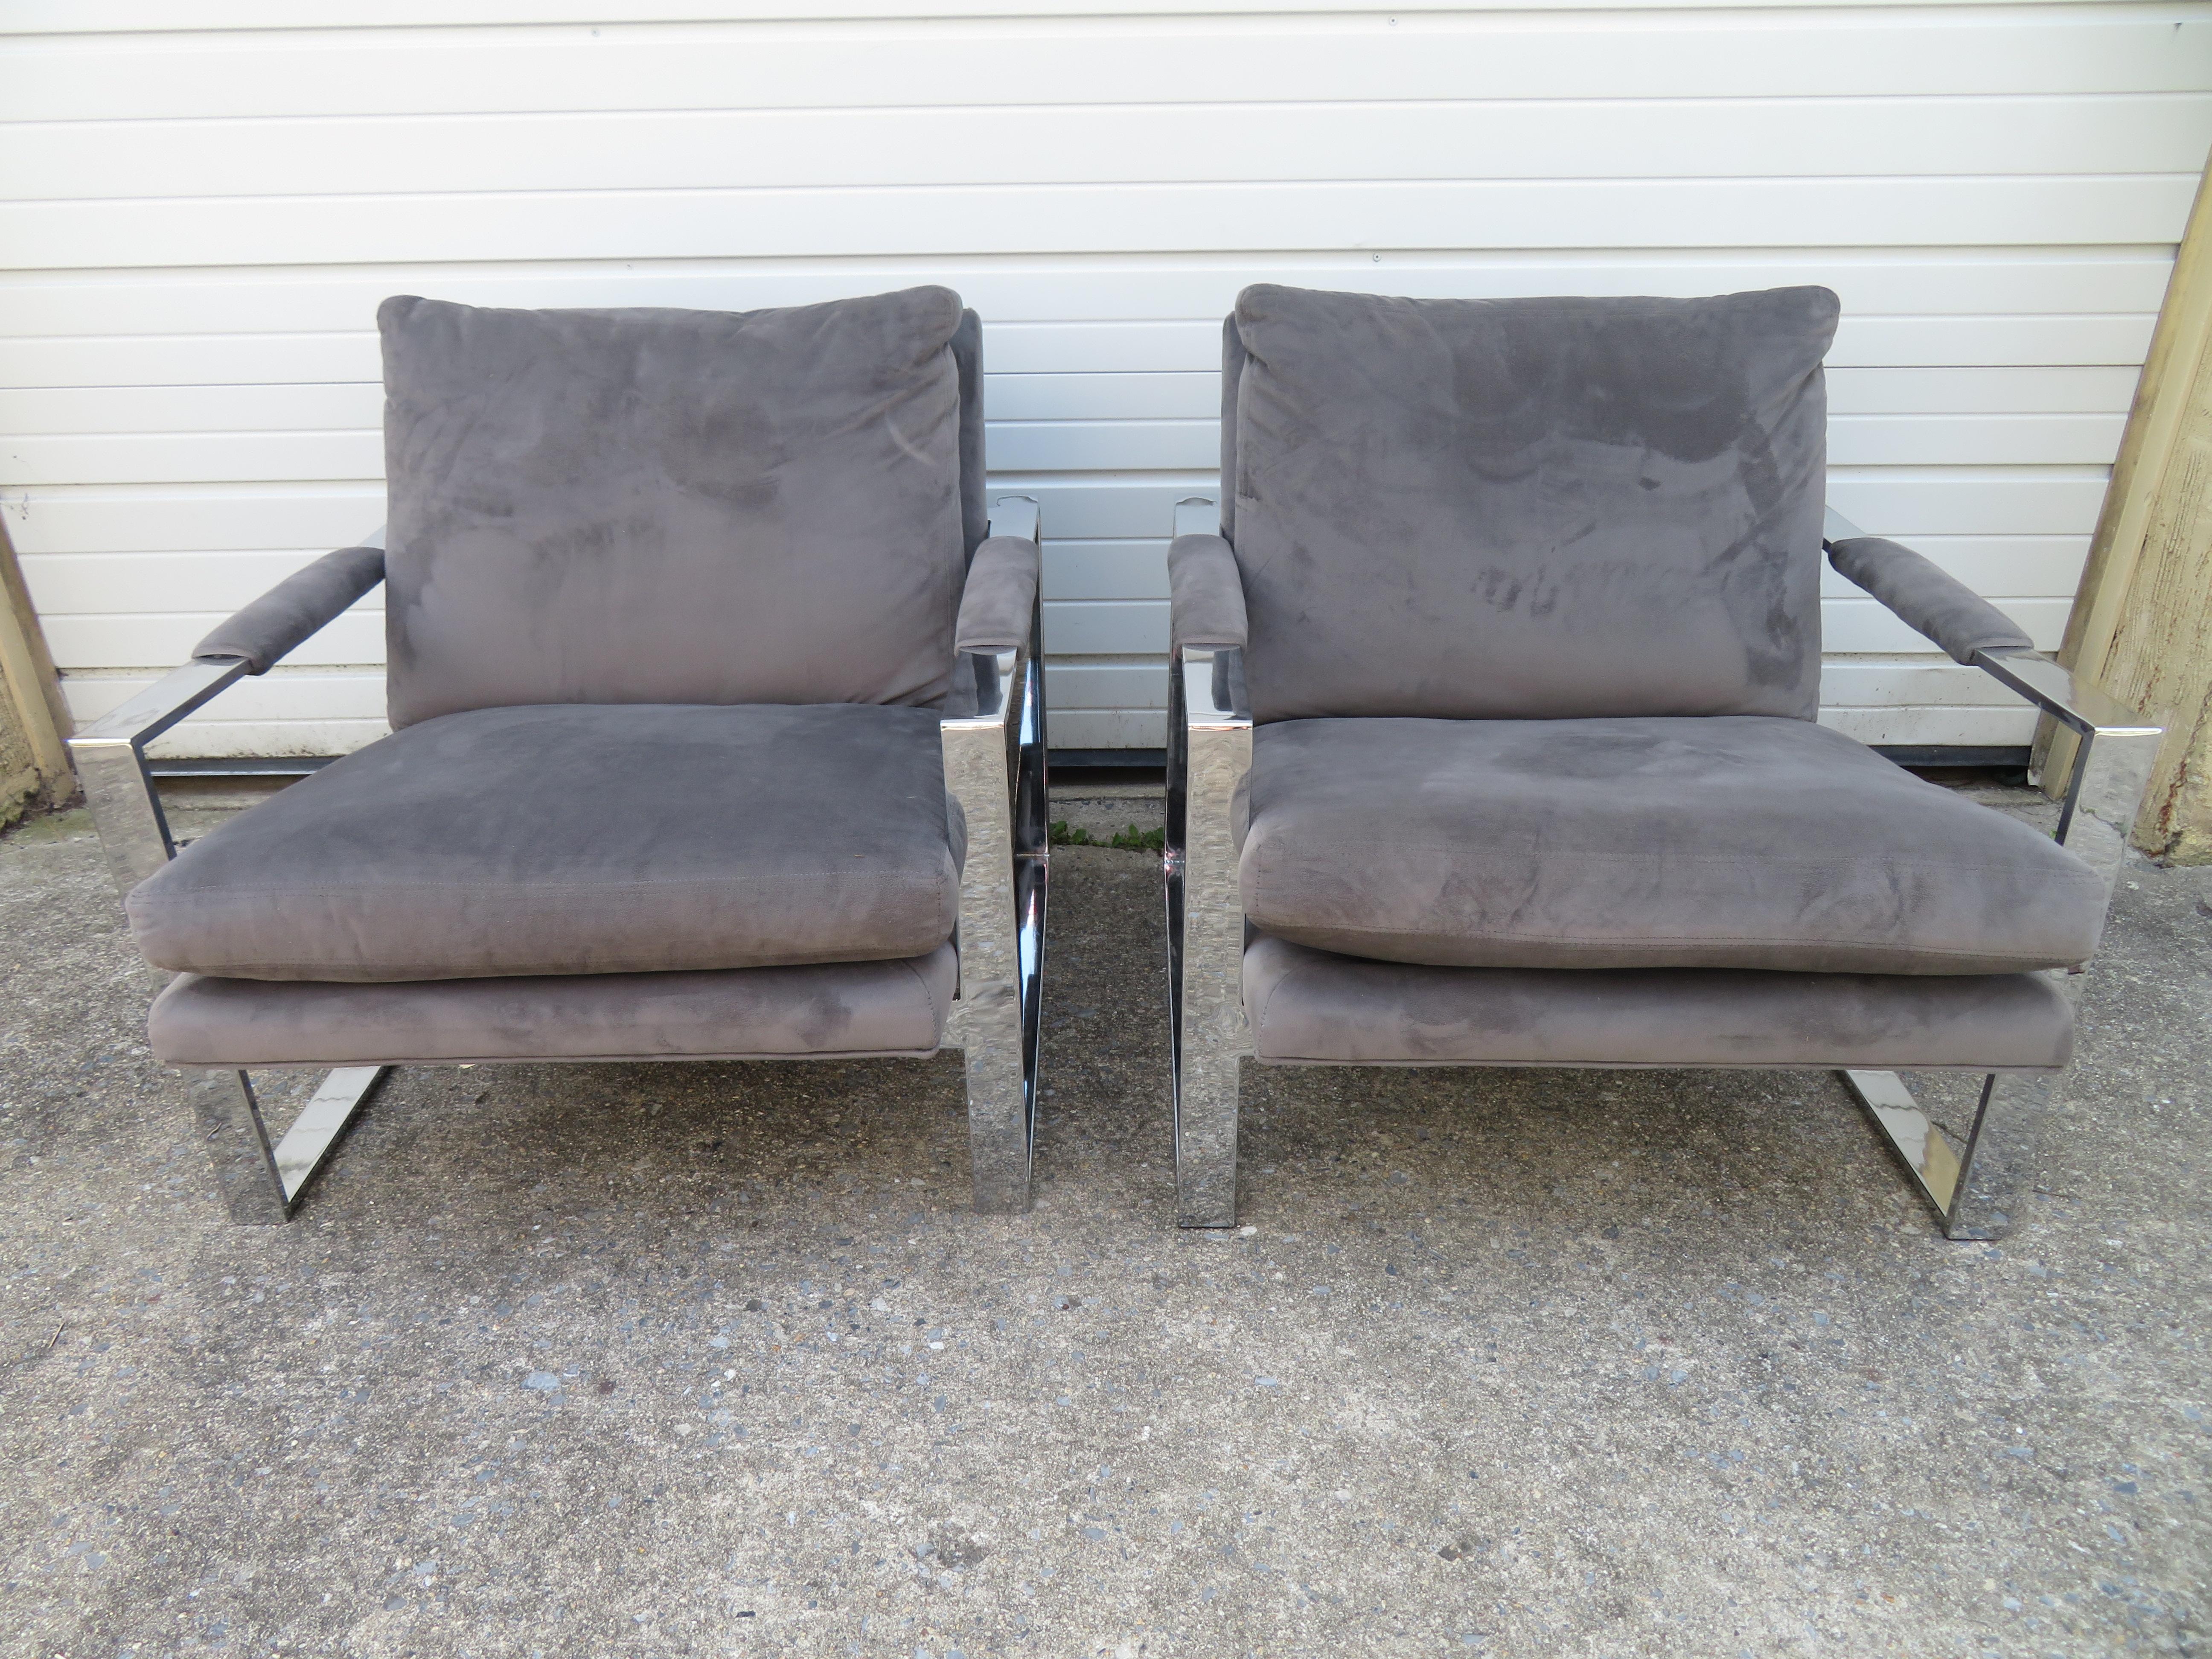 Handsome pair of signed Milo Baughman thick chrome cube lounge chairs. This pair retain their original grey velveteen fabric in nice vintage condition. The fabric has light signs of age but really looks quite good for being vintage-see photos. As